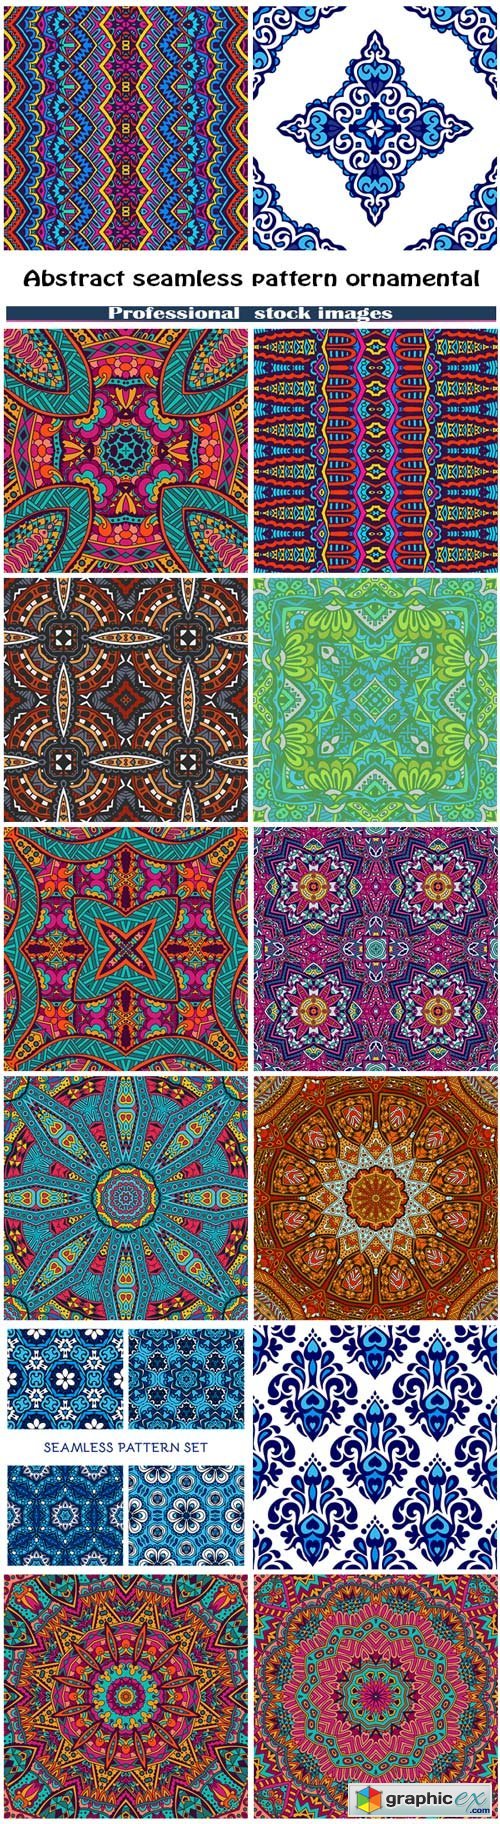 Abstract seamless pattern ornamental